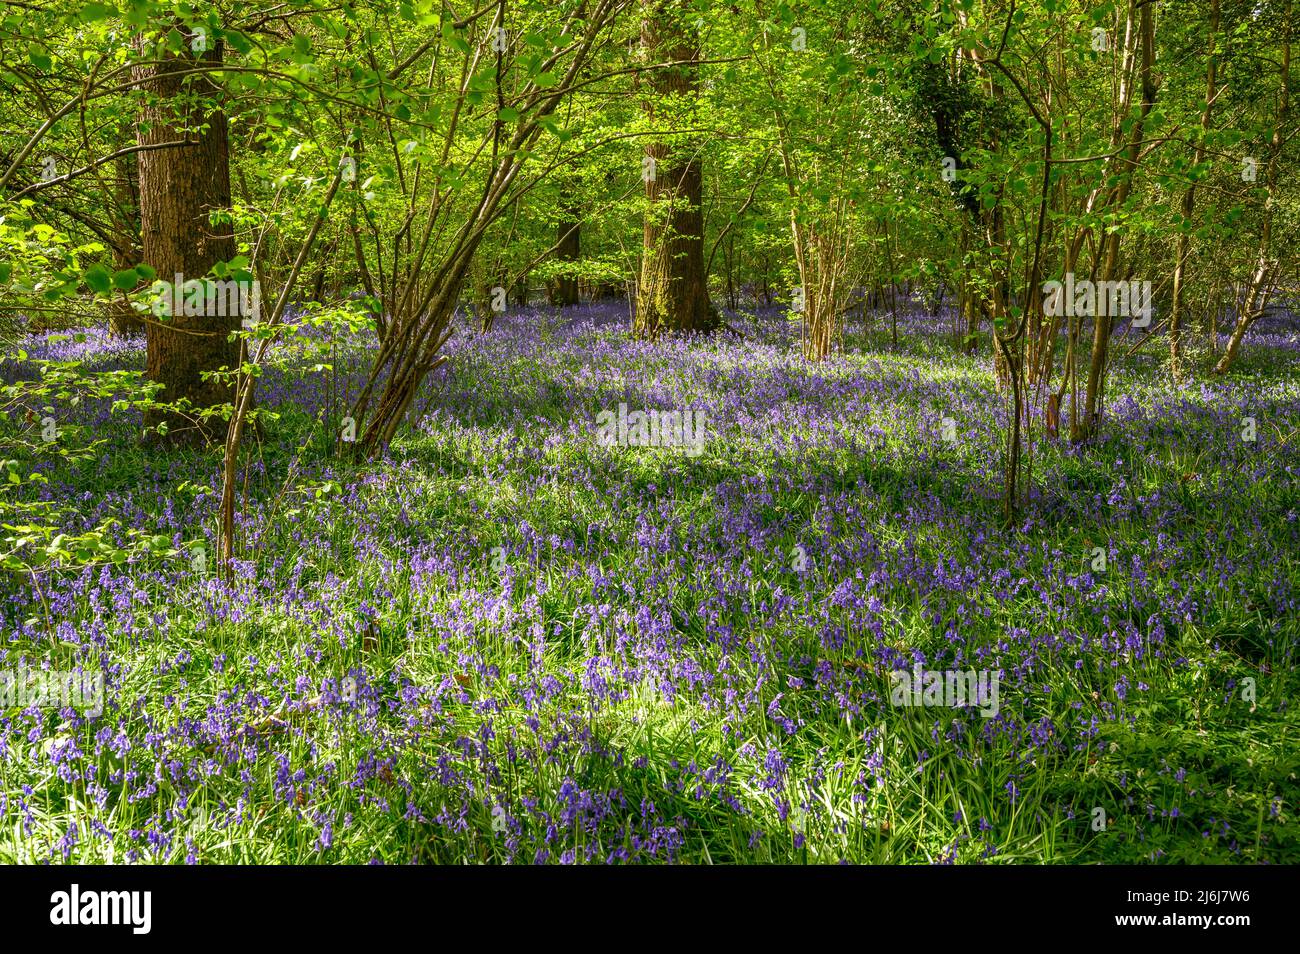 Dappled sunlight shining on trees and bluebells covering the forest floor in a wood on the outskirts of Billingshurst in West Sussex, England. Stock Photo